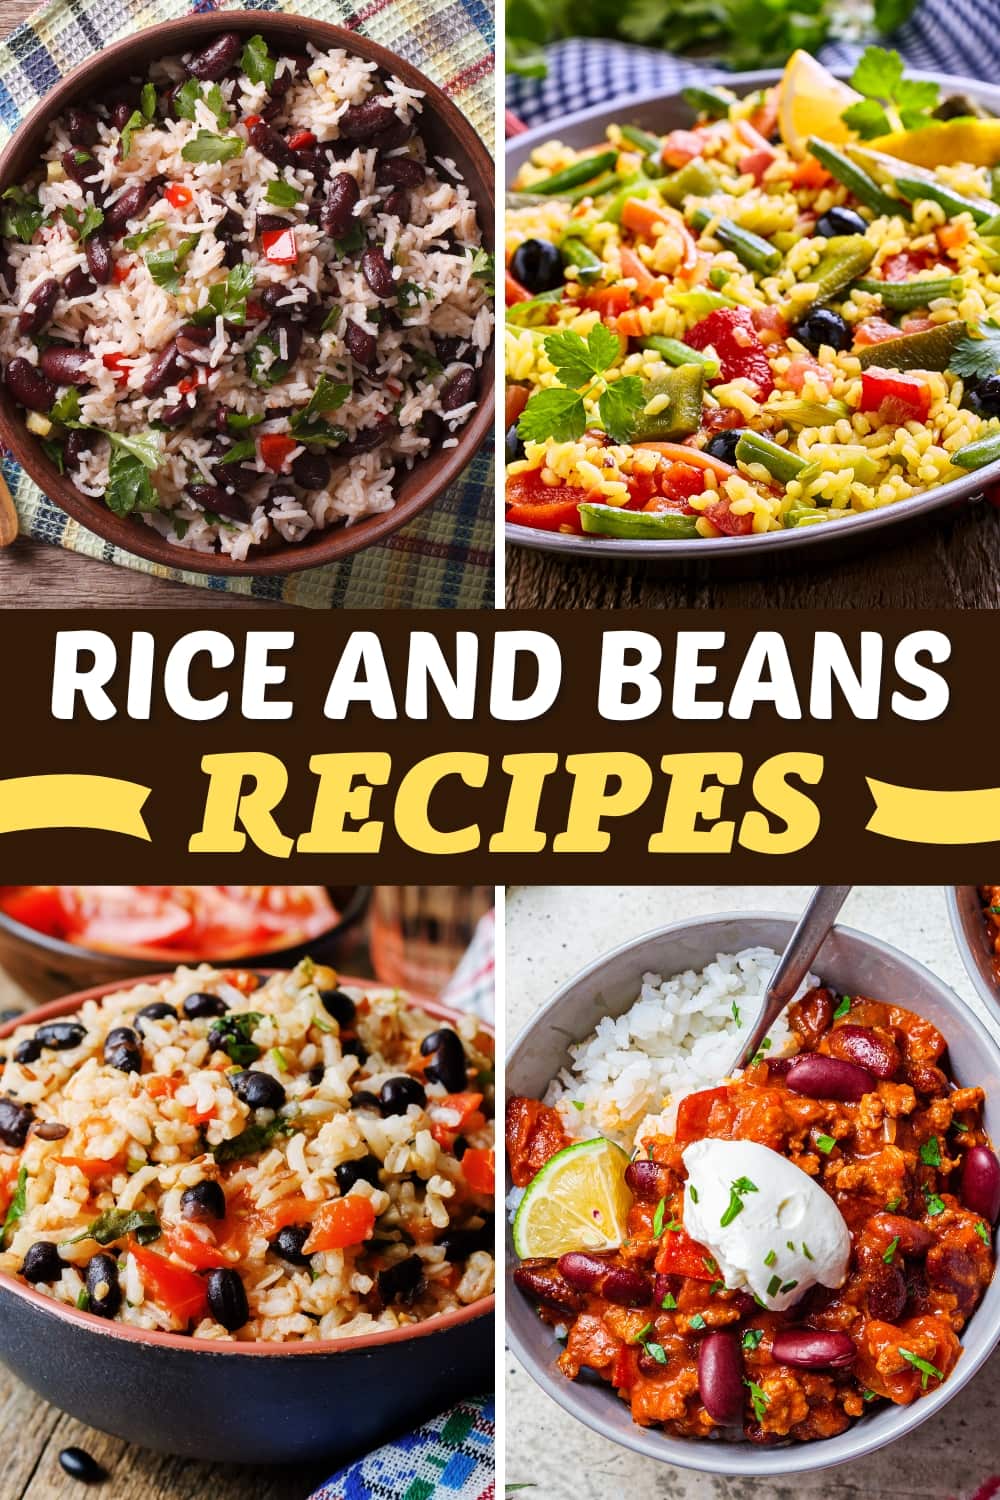 10 Easy Rice and Beans Recipes for Dinner - Insanely Good